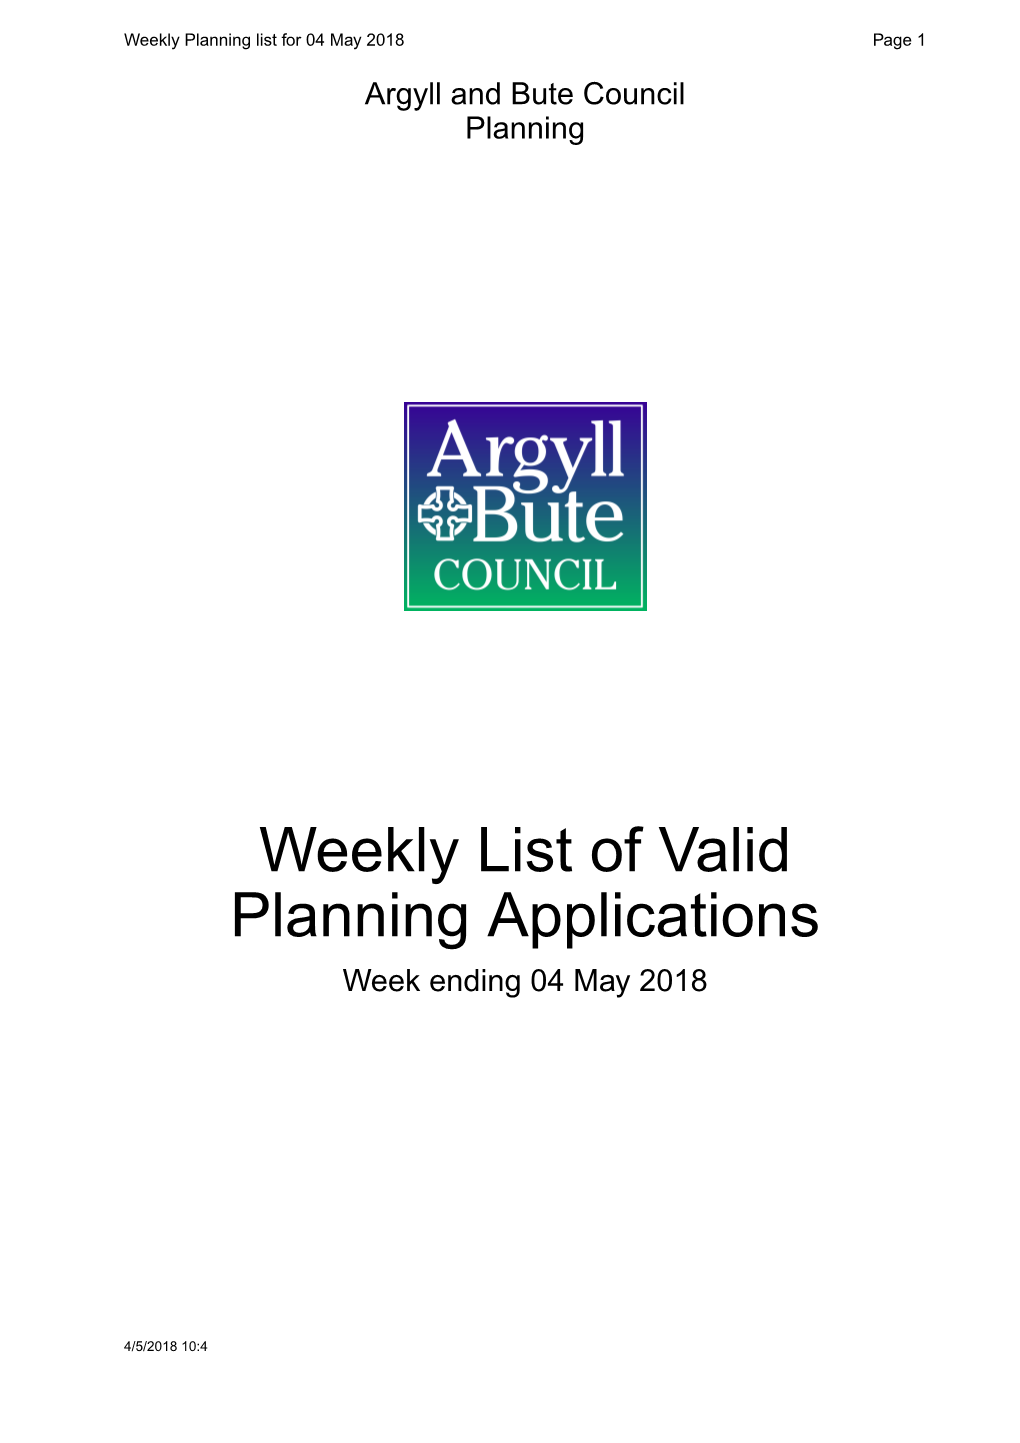 Weekly List of Valid Planning Applications 4Th May 2018.Pdf